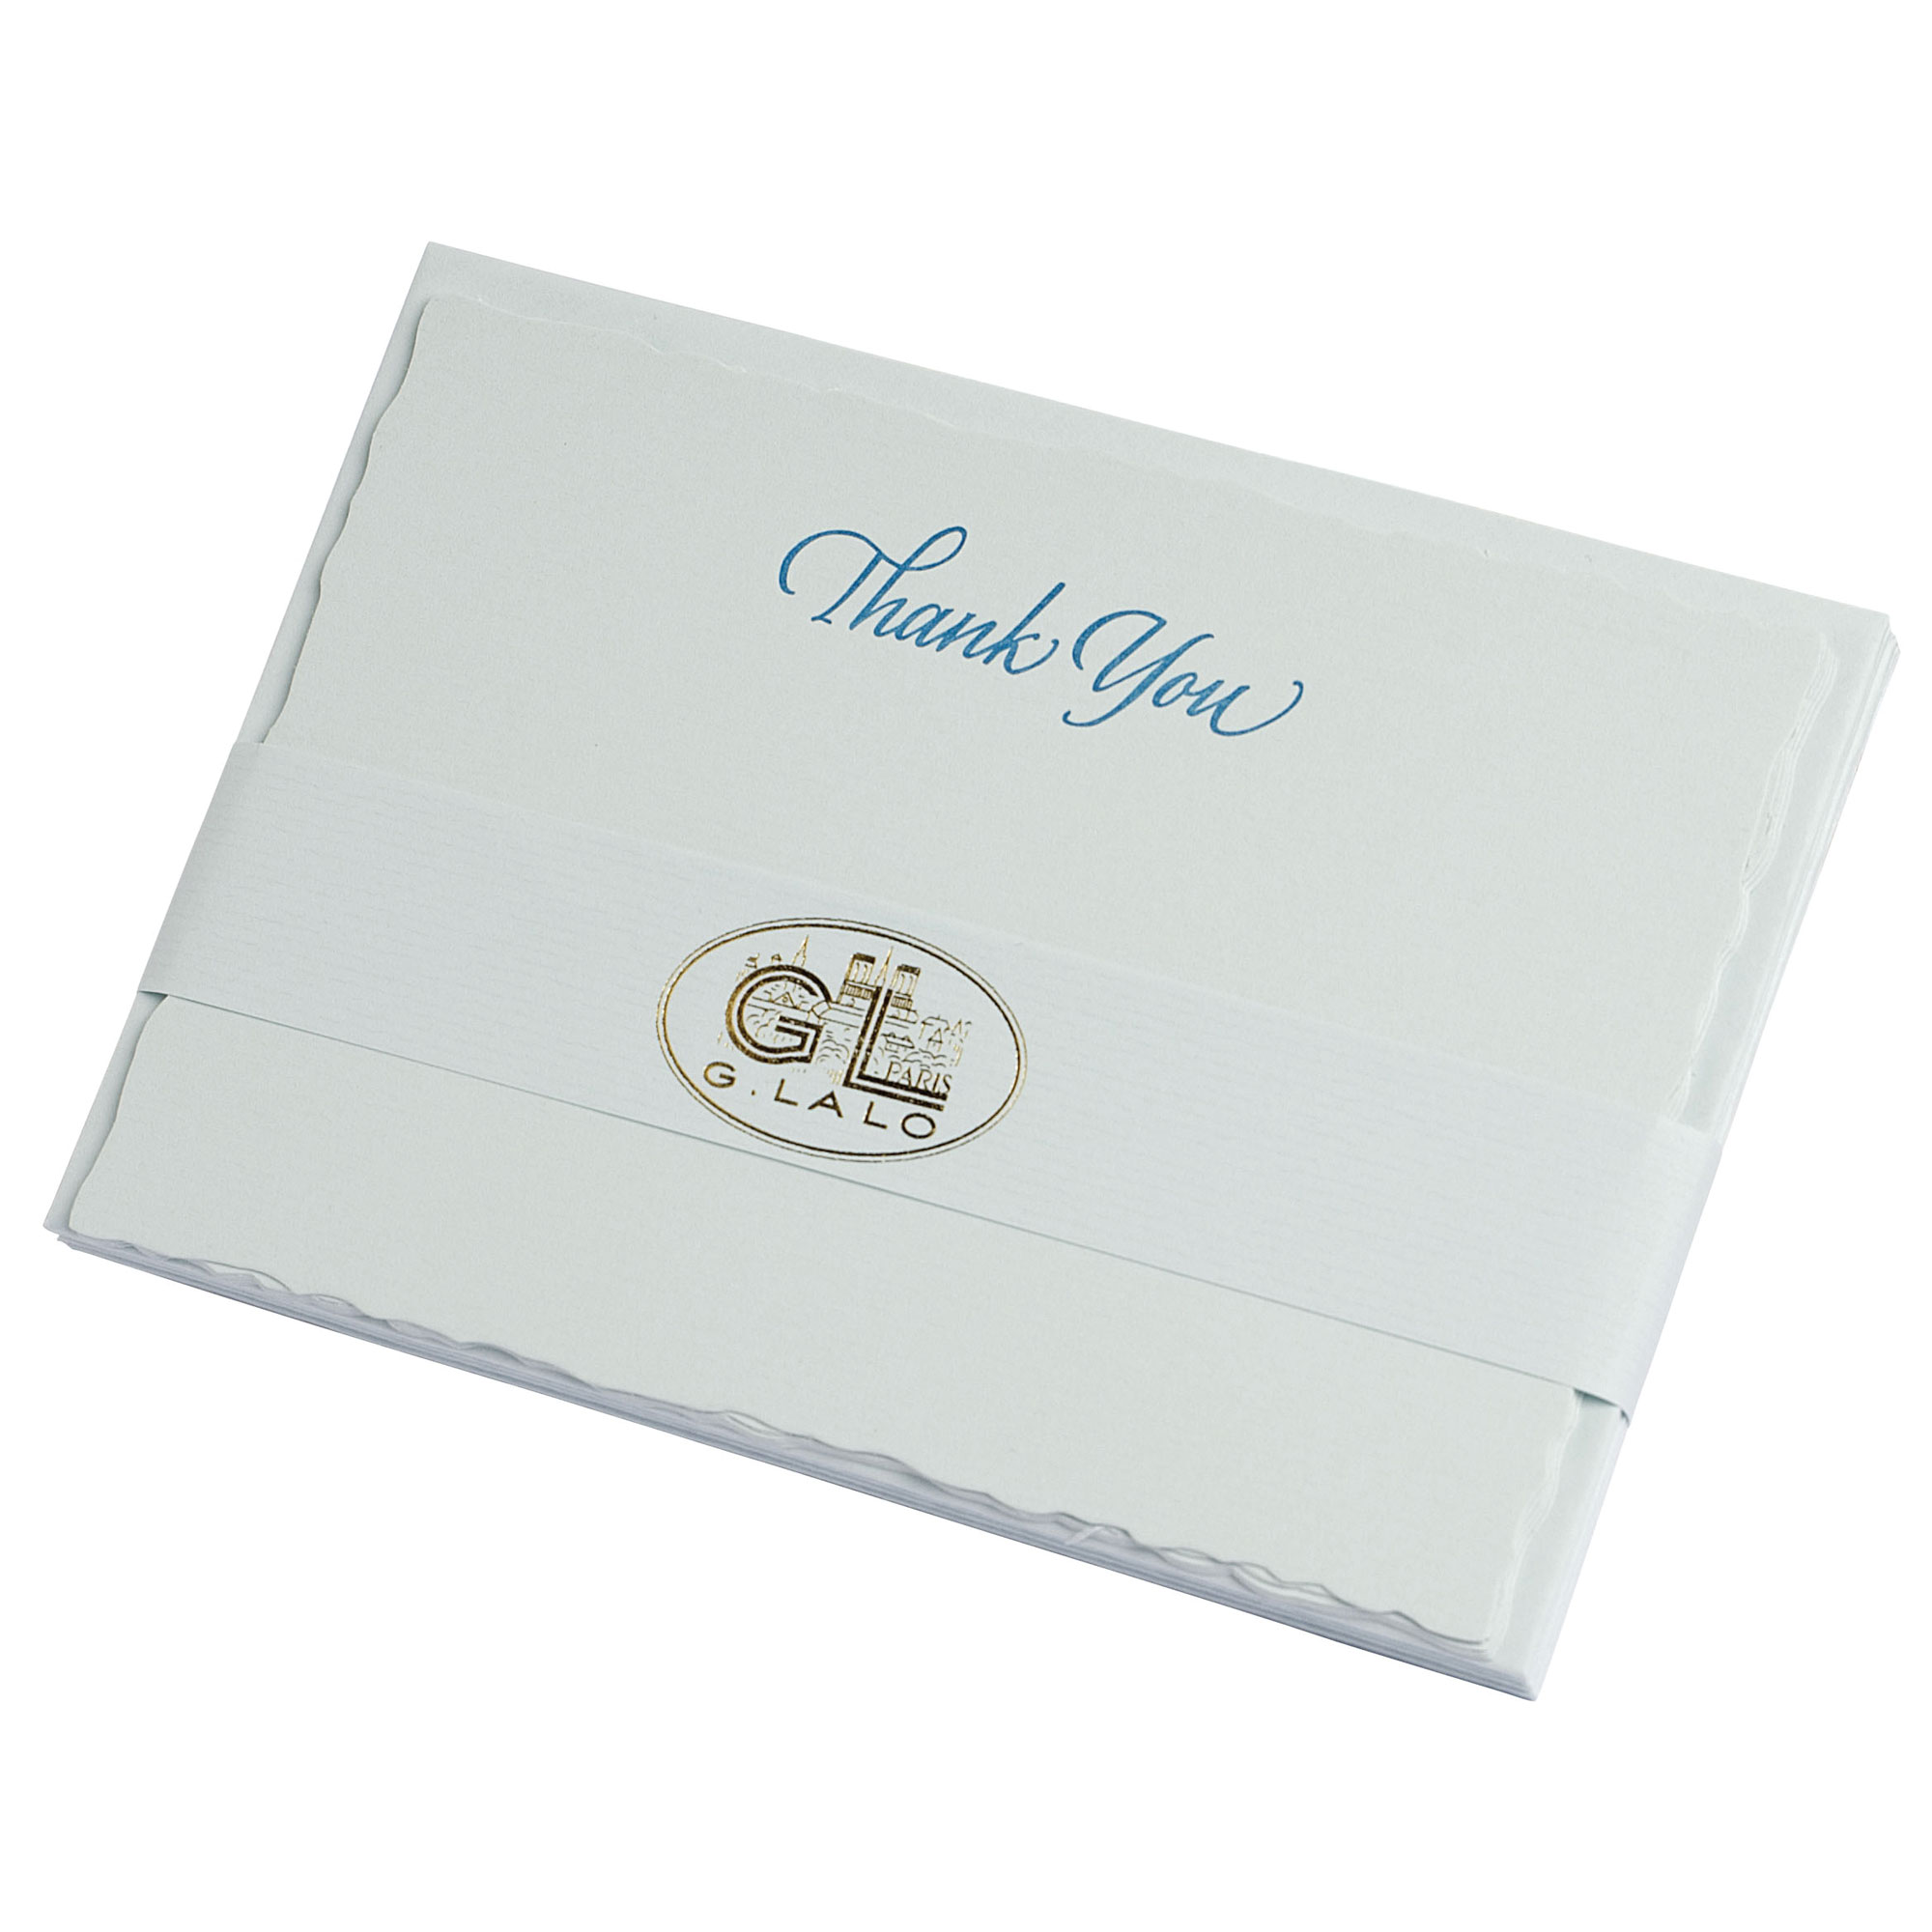 Verge de France Thank You Cards - Show Special Net Price $2.00